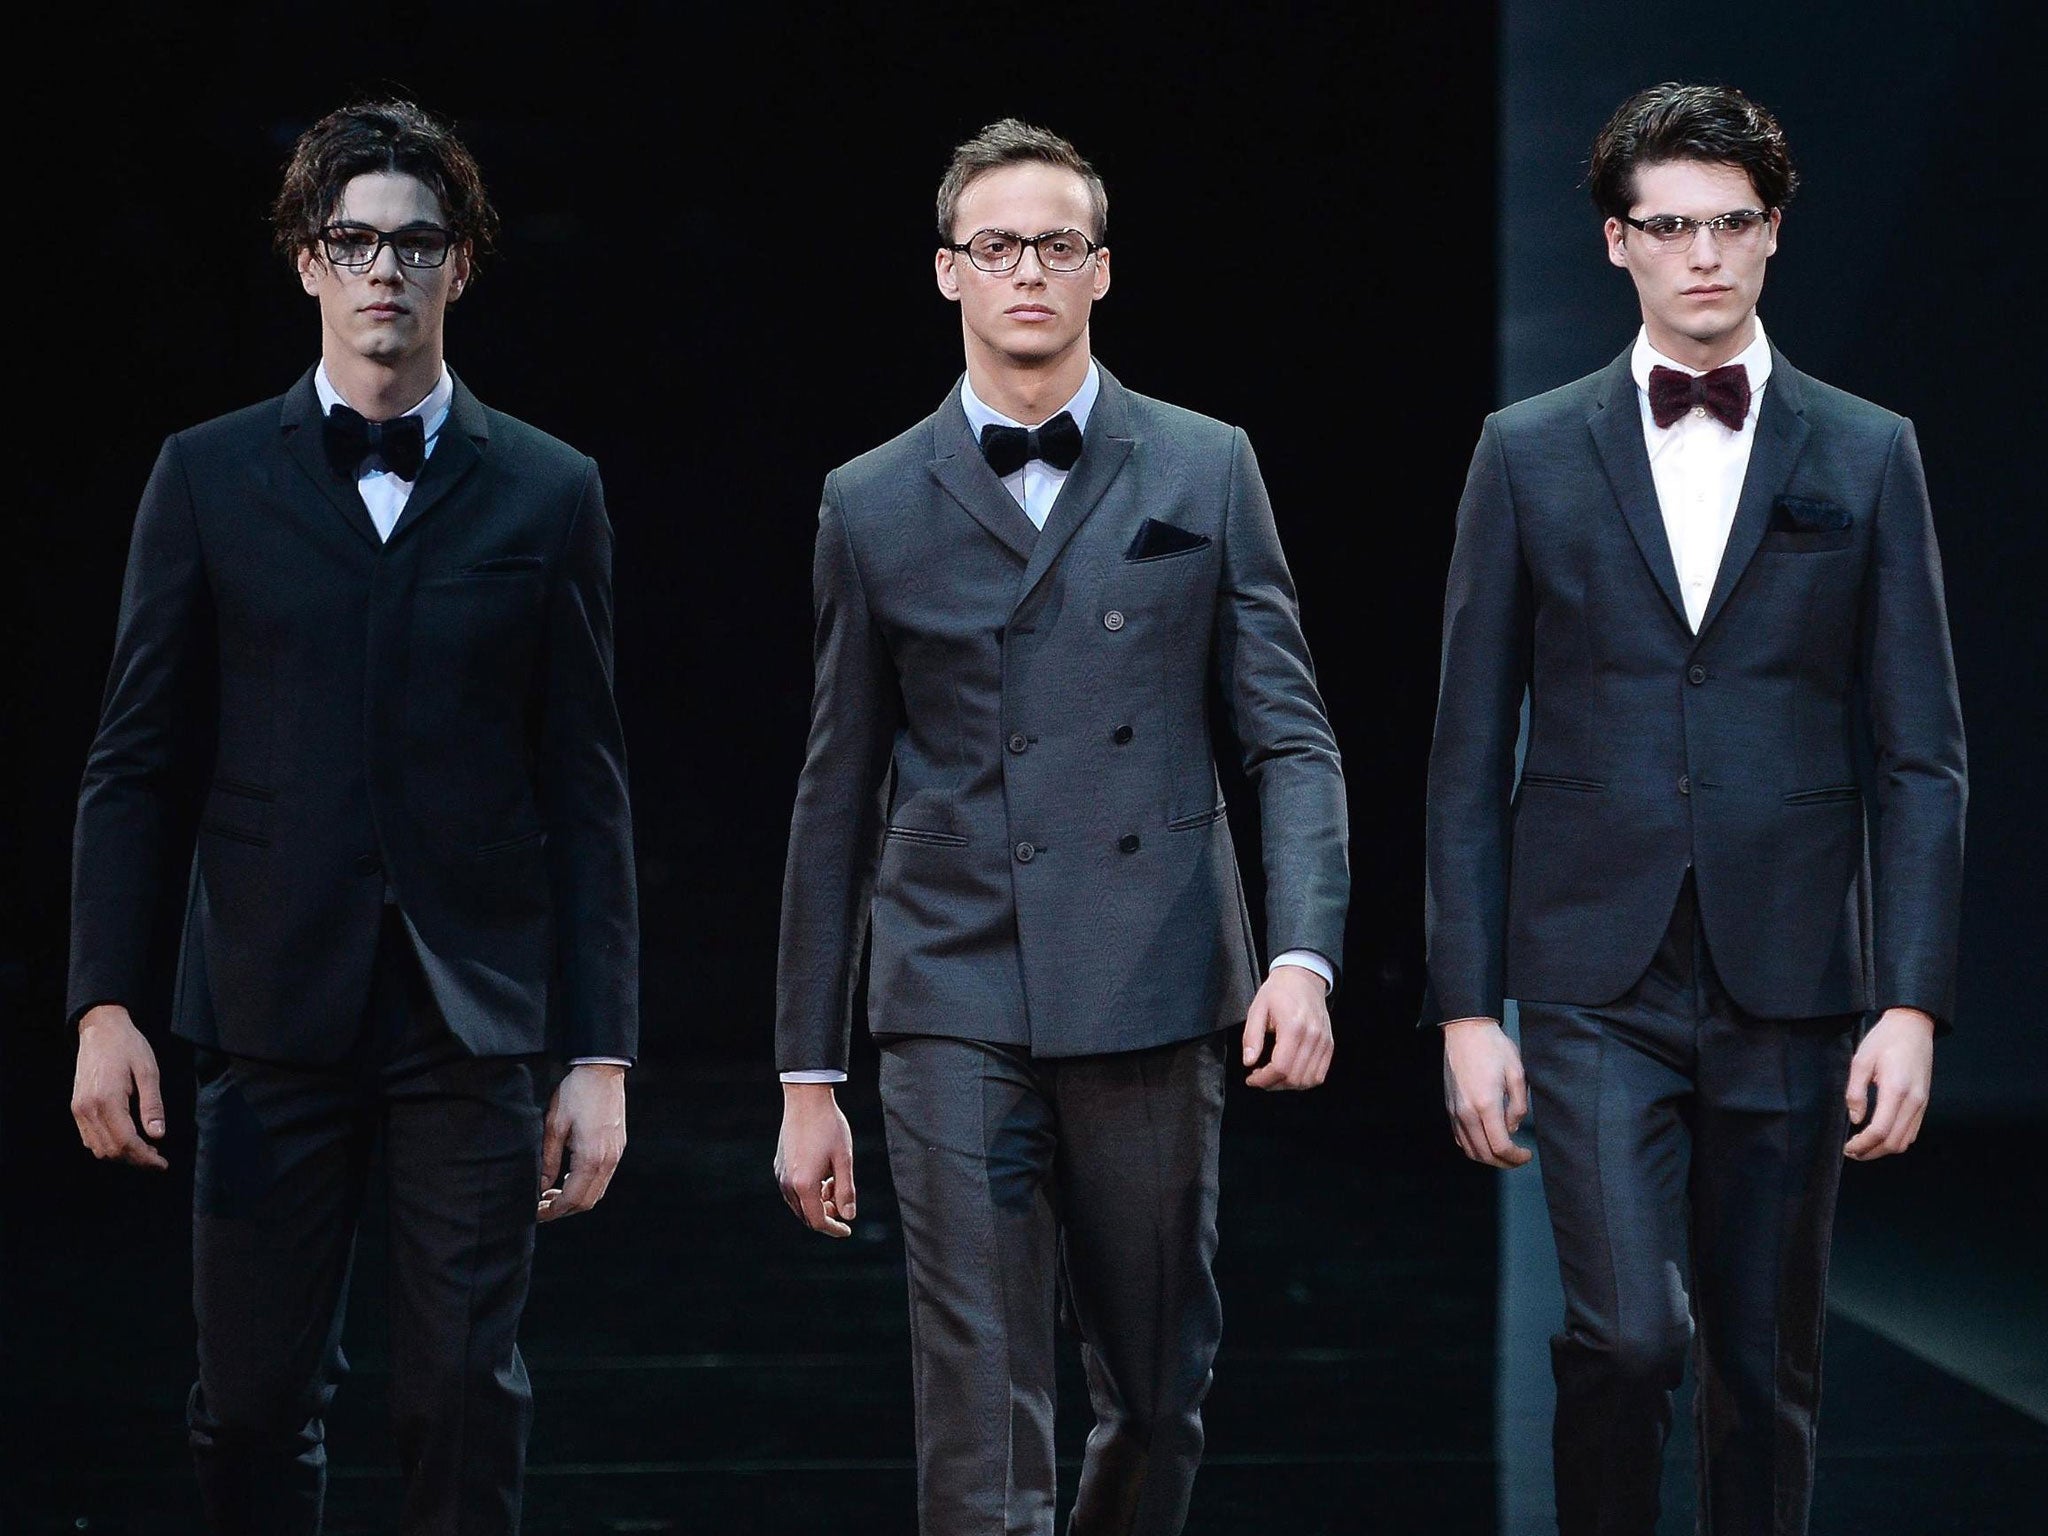 Models present creations by Emporio Armani at the Fall/Winter 2014 Men's collection